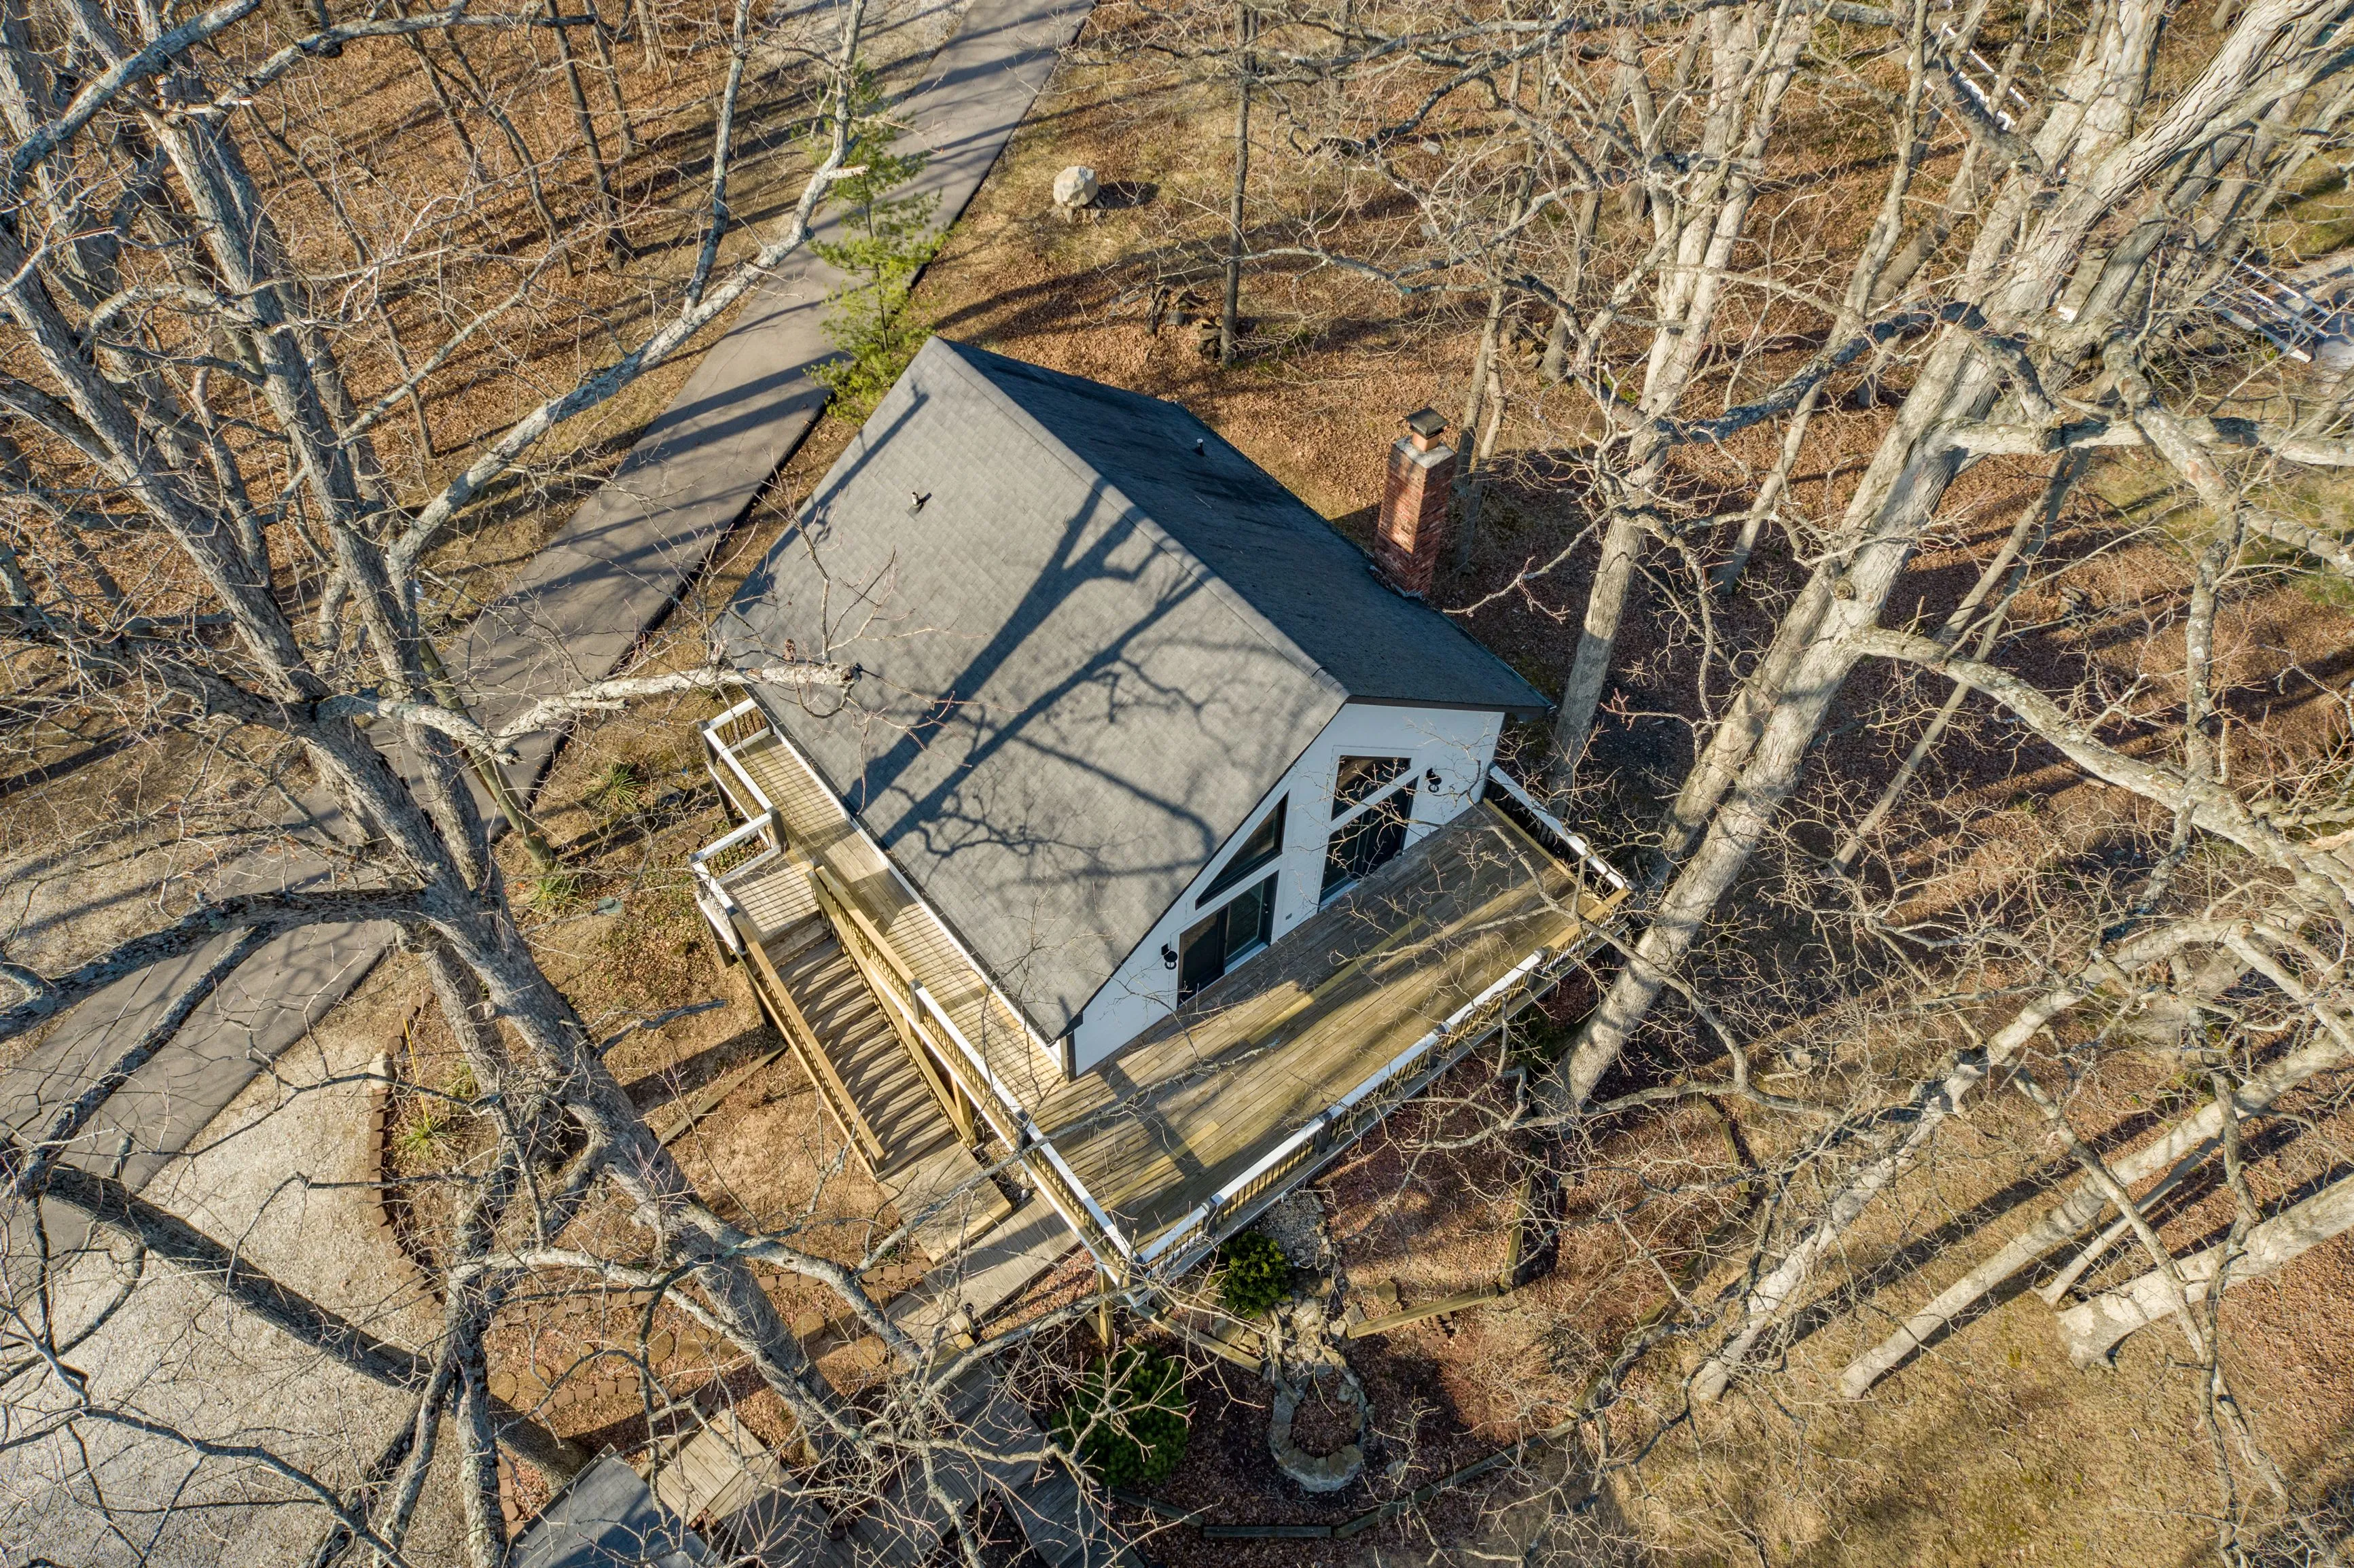 Aerial view of a small house surrounded by leafless trees with visible garden beds and a pathway.